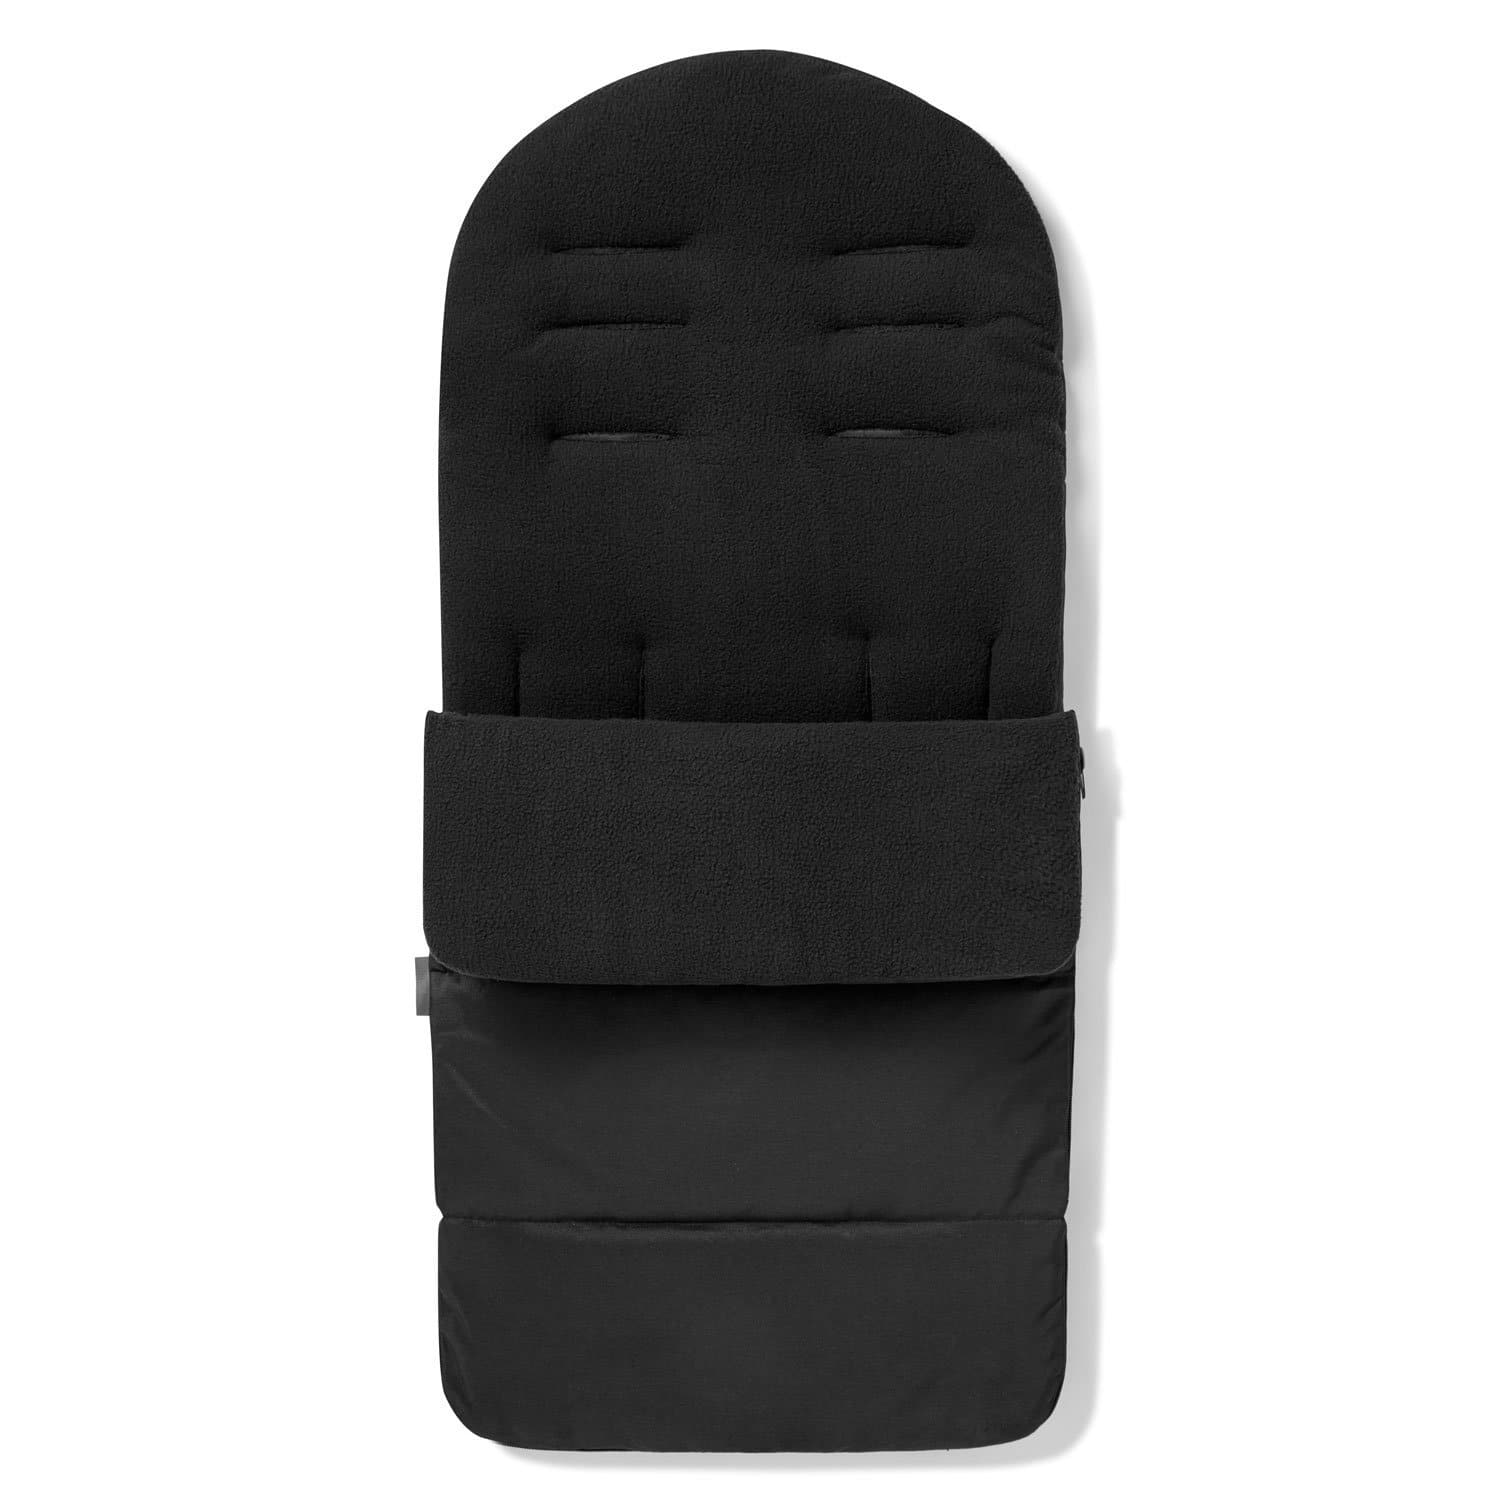 Premium Footmuff / Cosy Toes Compatible with Maclaren - Black Jack / Fits All Models | For Your Little One